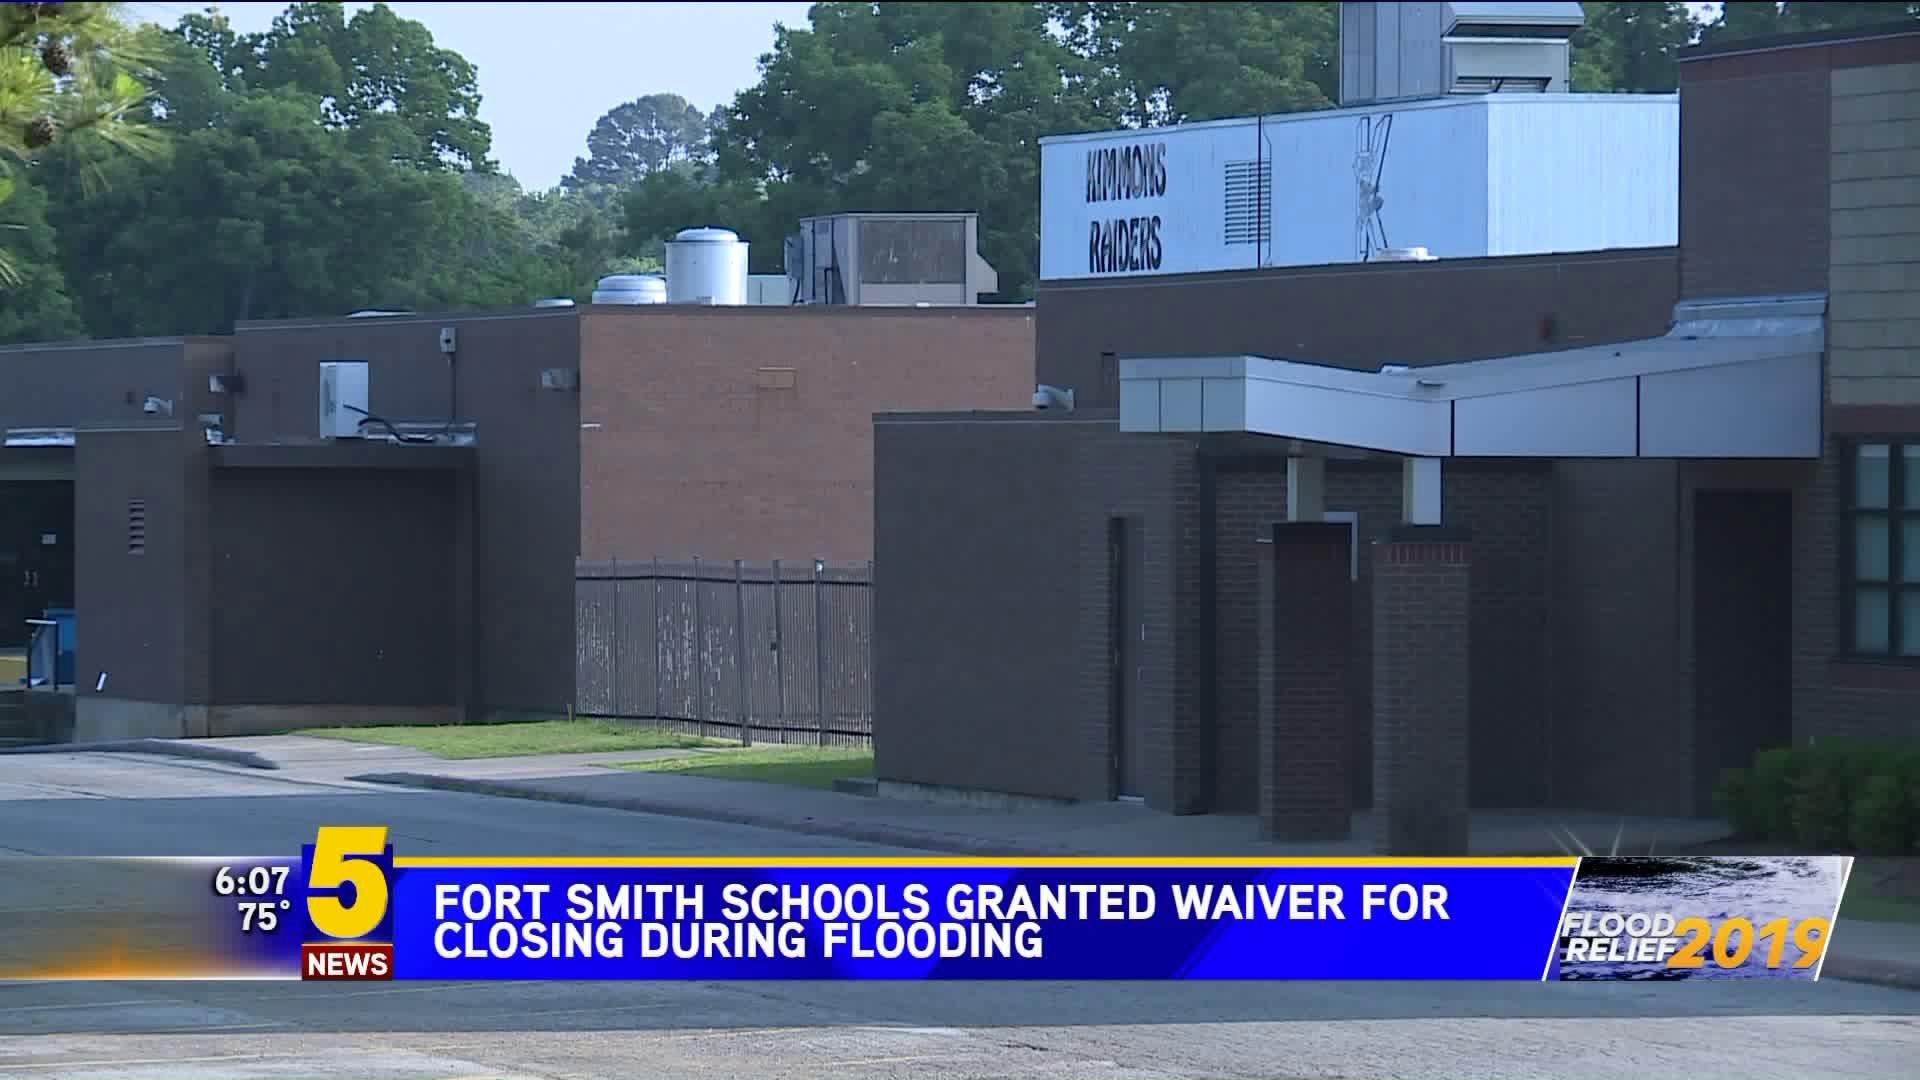 Fort Smith Schools Granted Waiver for Closing During Flooding